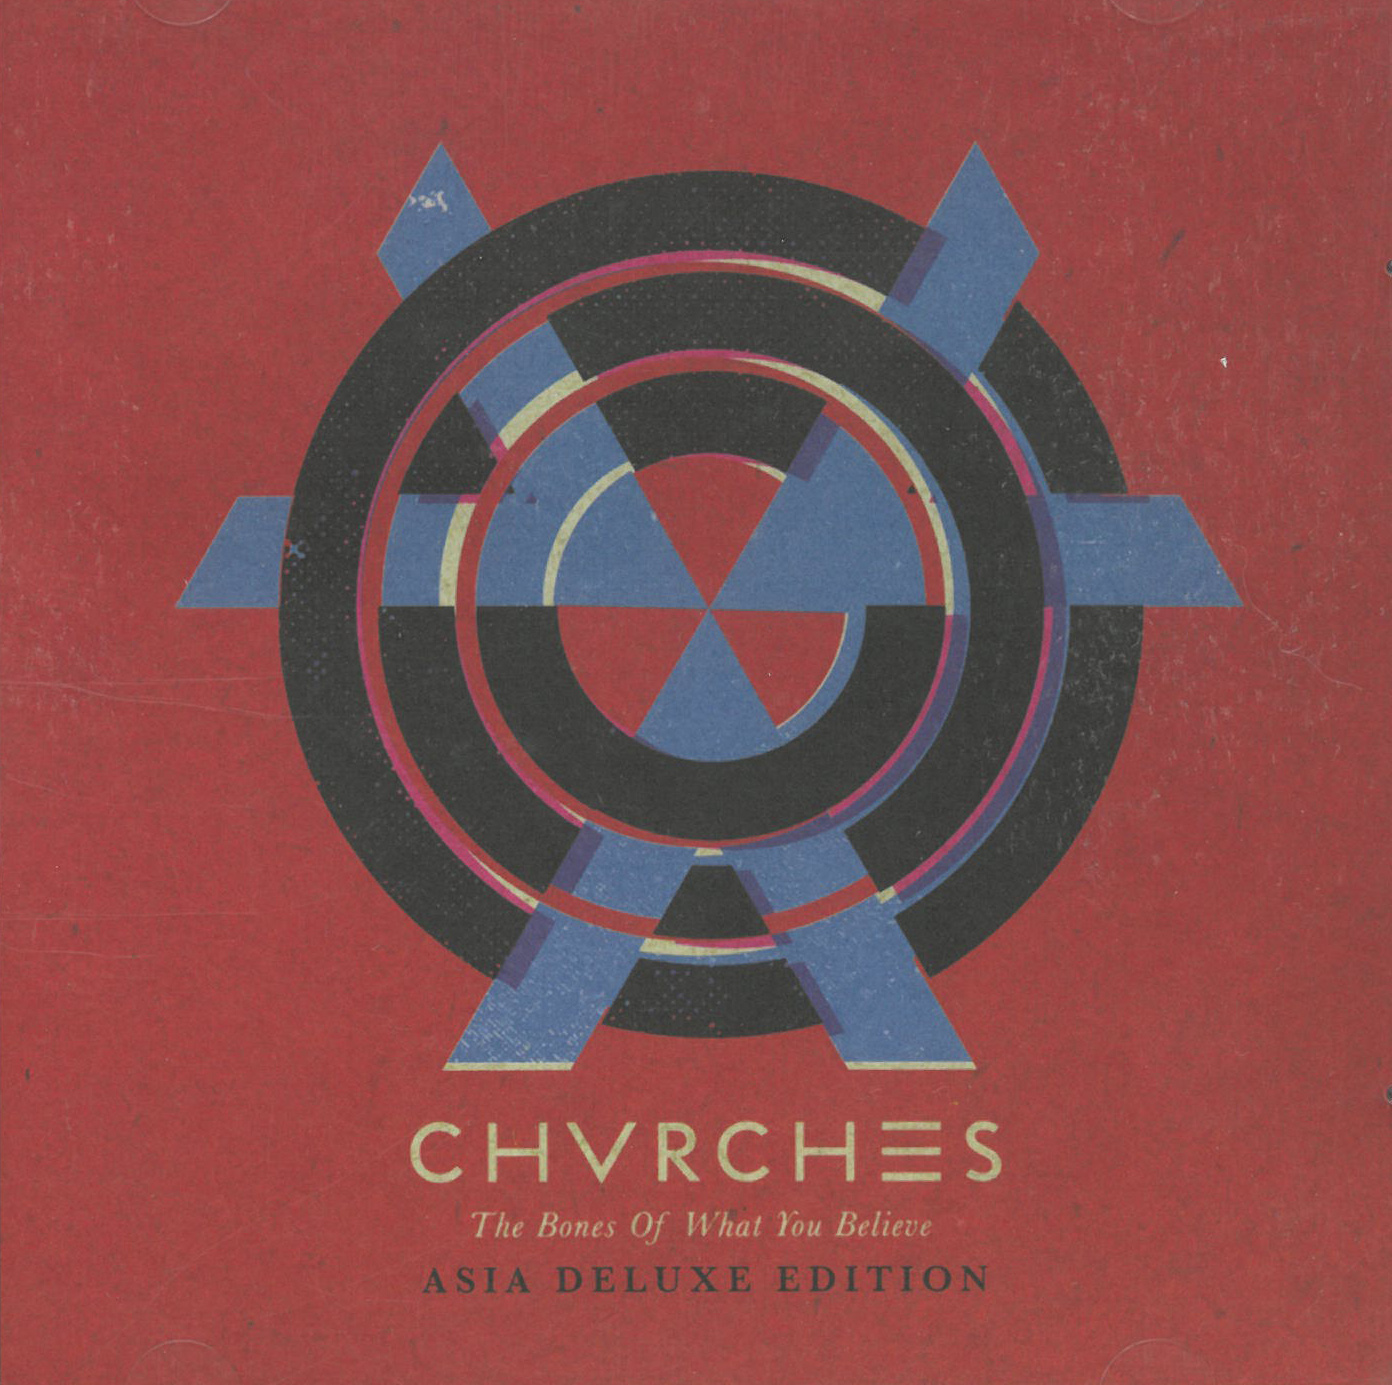 Chvrches Bones Of What You Believe (Asia Deluxe Edition) CD 602144